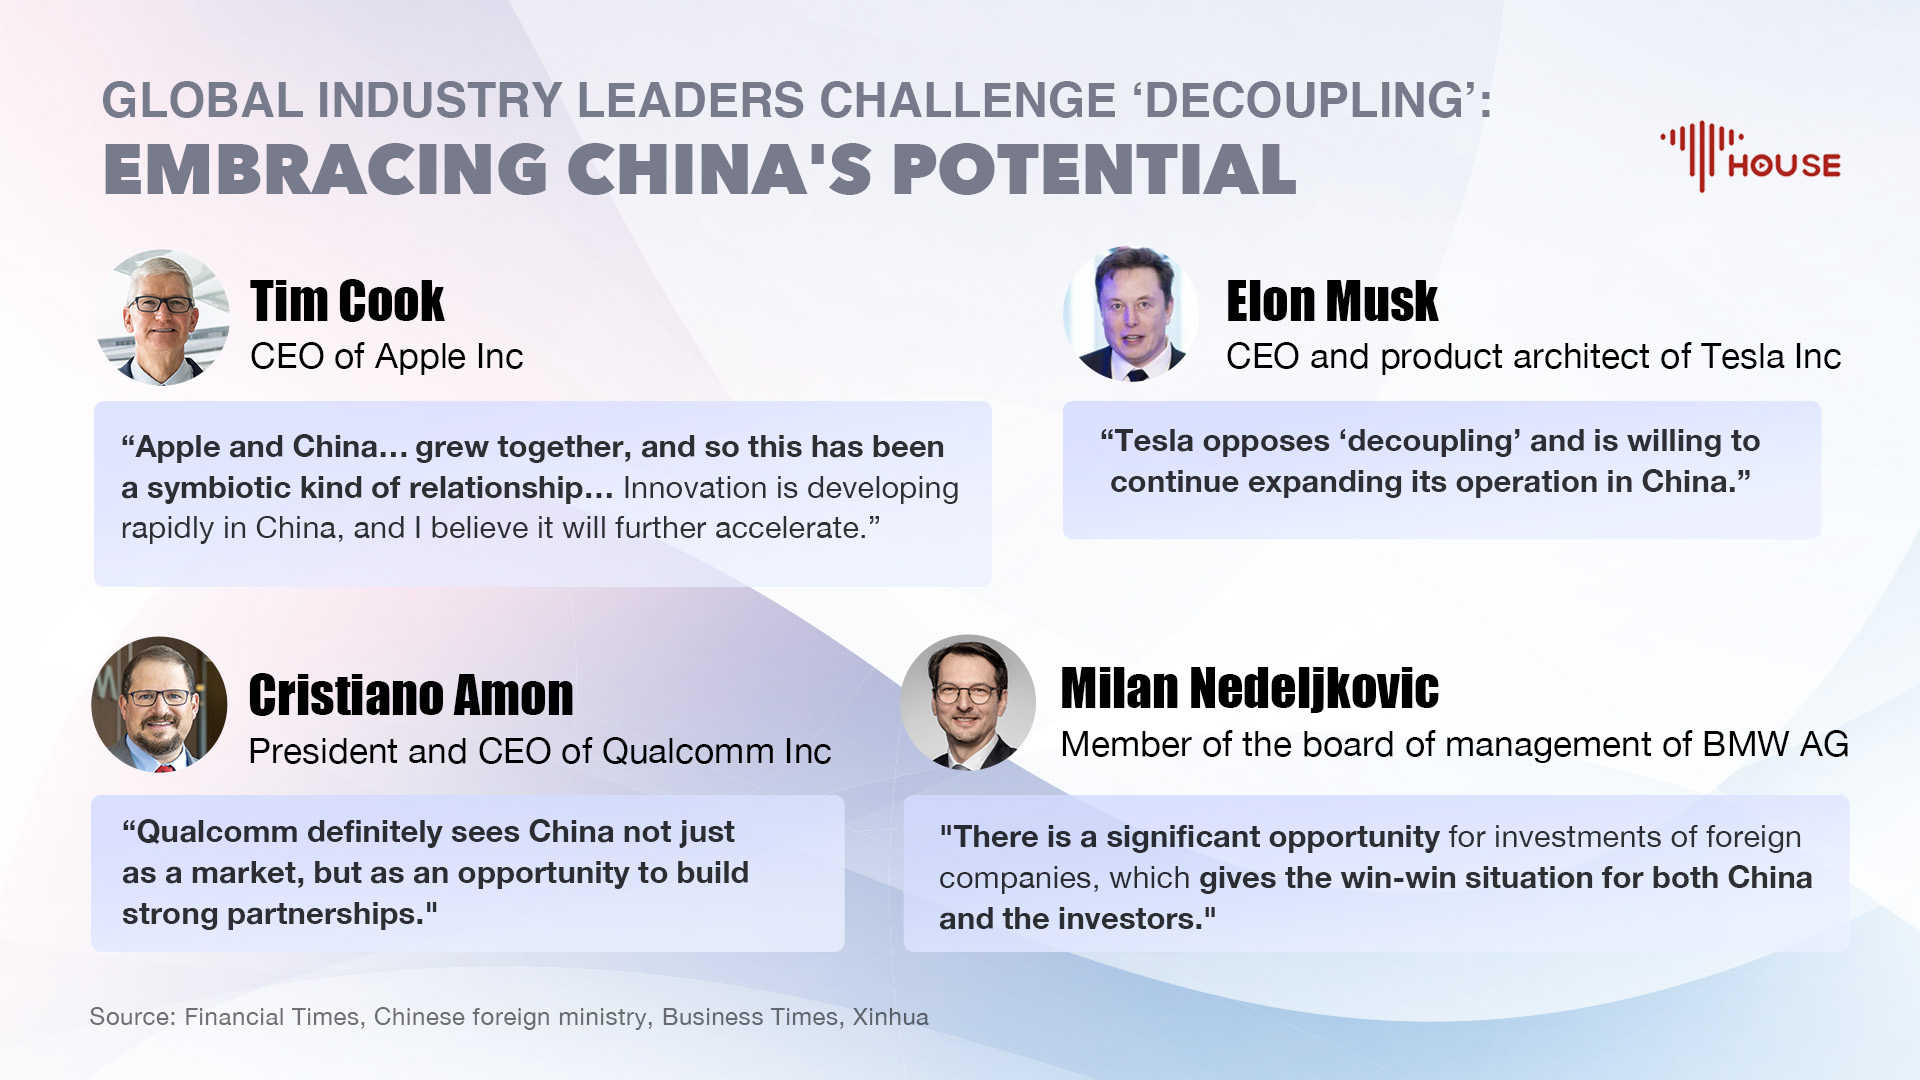 Global industry leaders challenge 'decoupling': Embracing China's potential